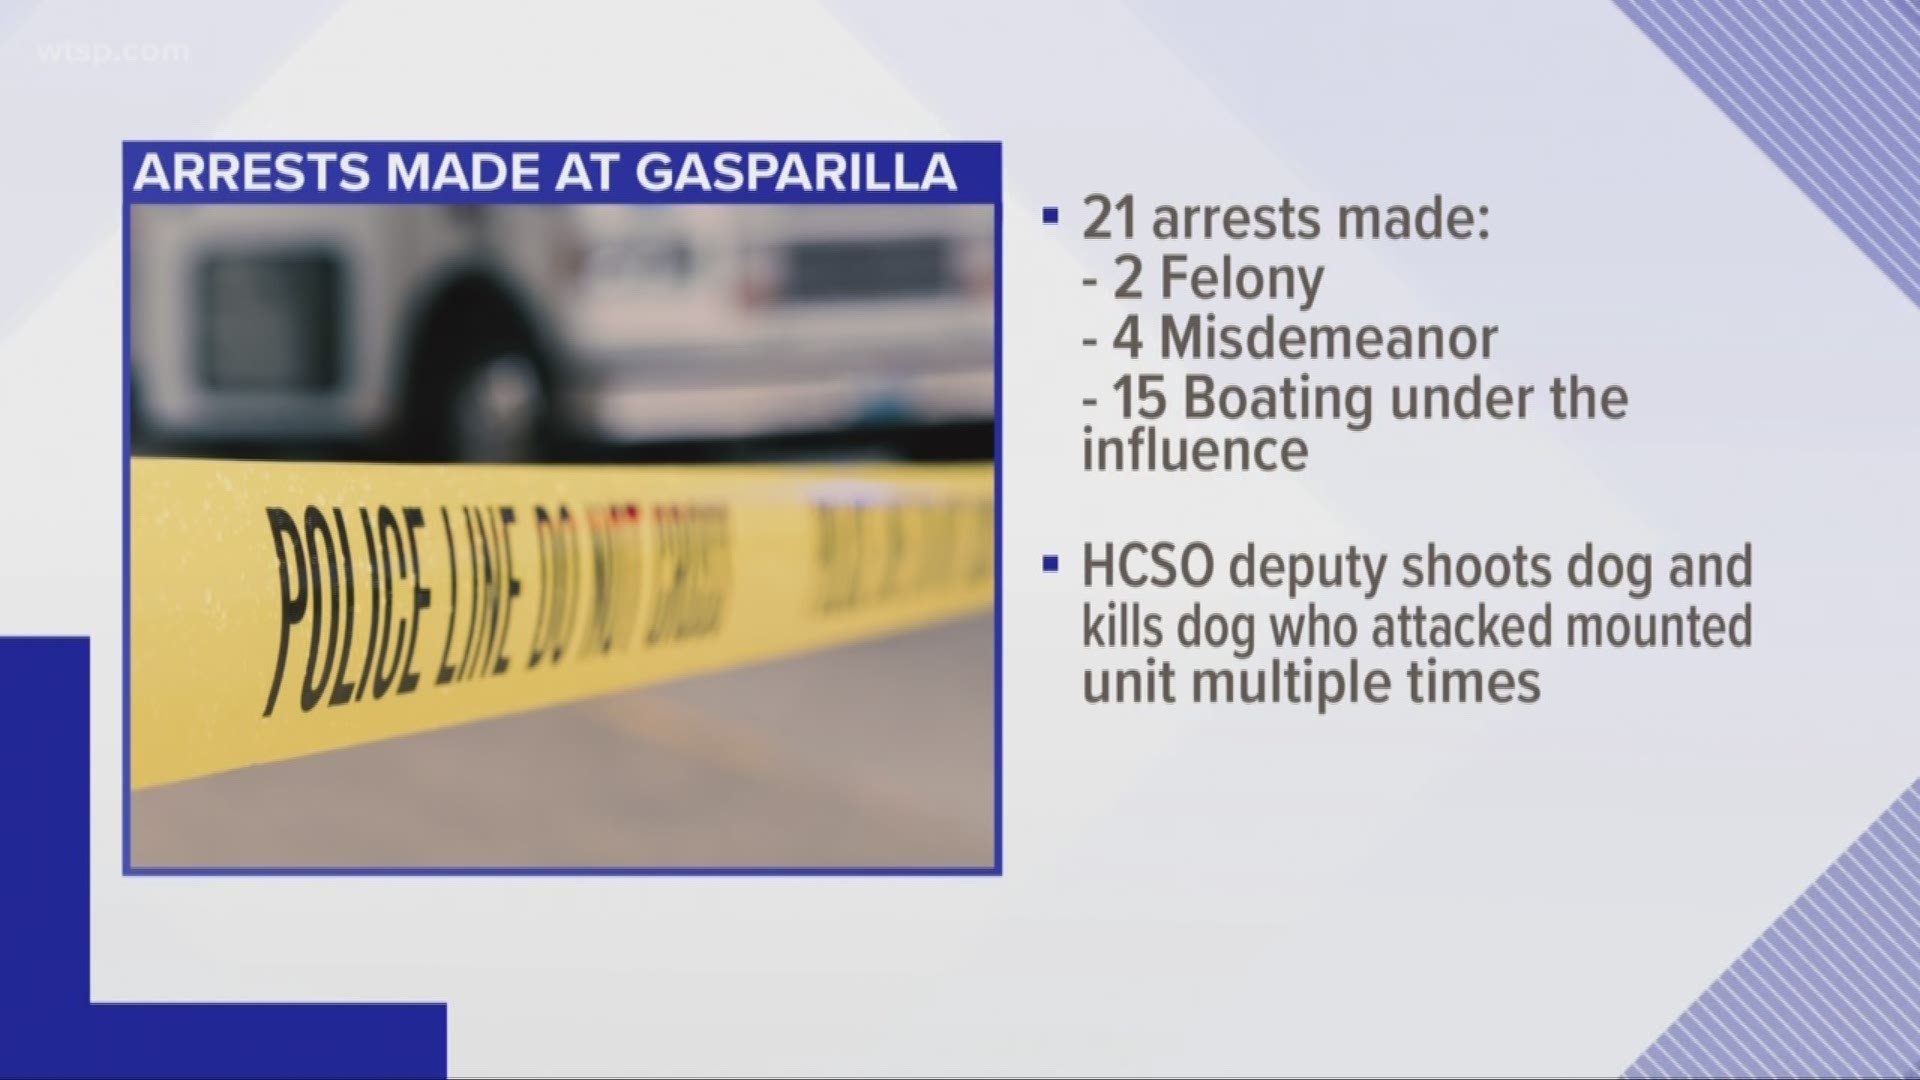 Most of the Gasparilla arrests were boating under the influence.